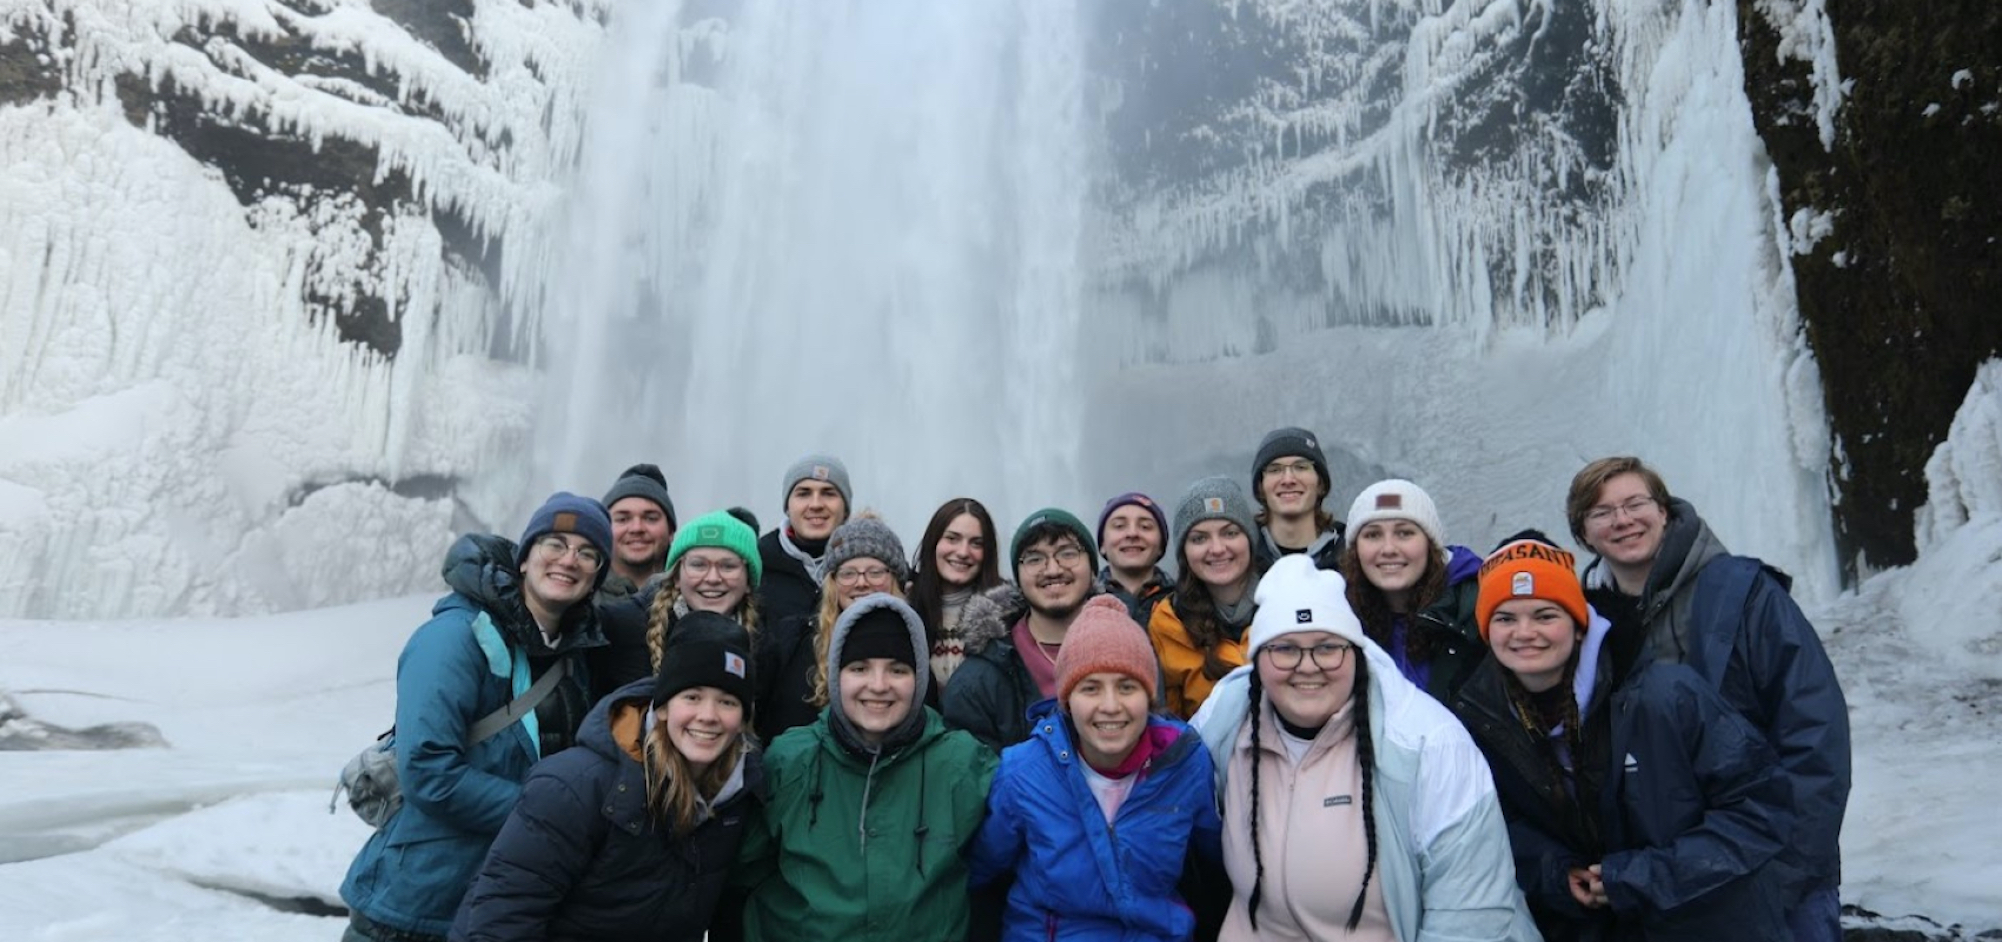 Group in front of waterfall